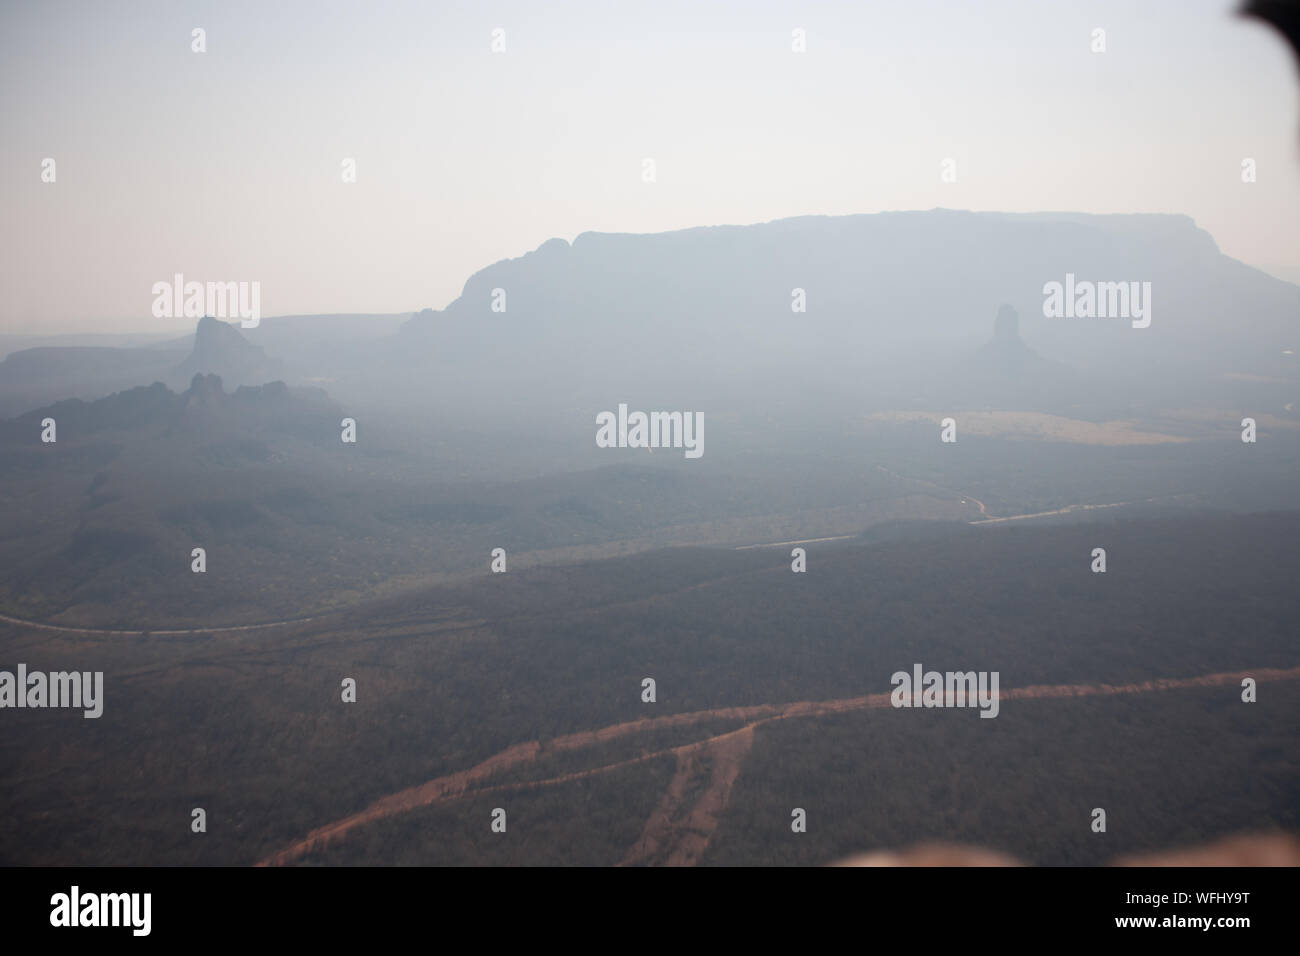 SUCRE, OP - 29.08.2019: LAND BURNED BY FIRES IN BOLIVIA - It overflows through Robore's, wherwhere it can be seen that the fire caused by the fire. (Photo: Gaston Brito/Fotoarena) Credit: Foto Arena LTDA/Alamy Live News Credit: Foto Arena LTDA/Alamy Live News Stock Photo